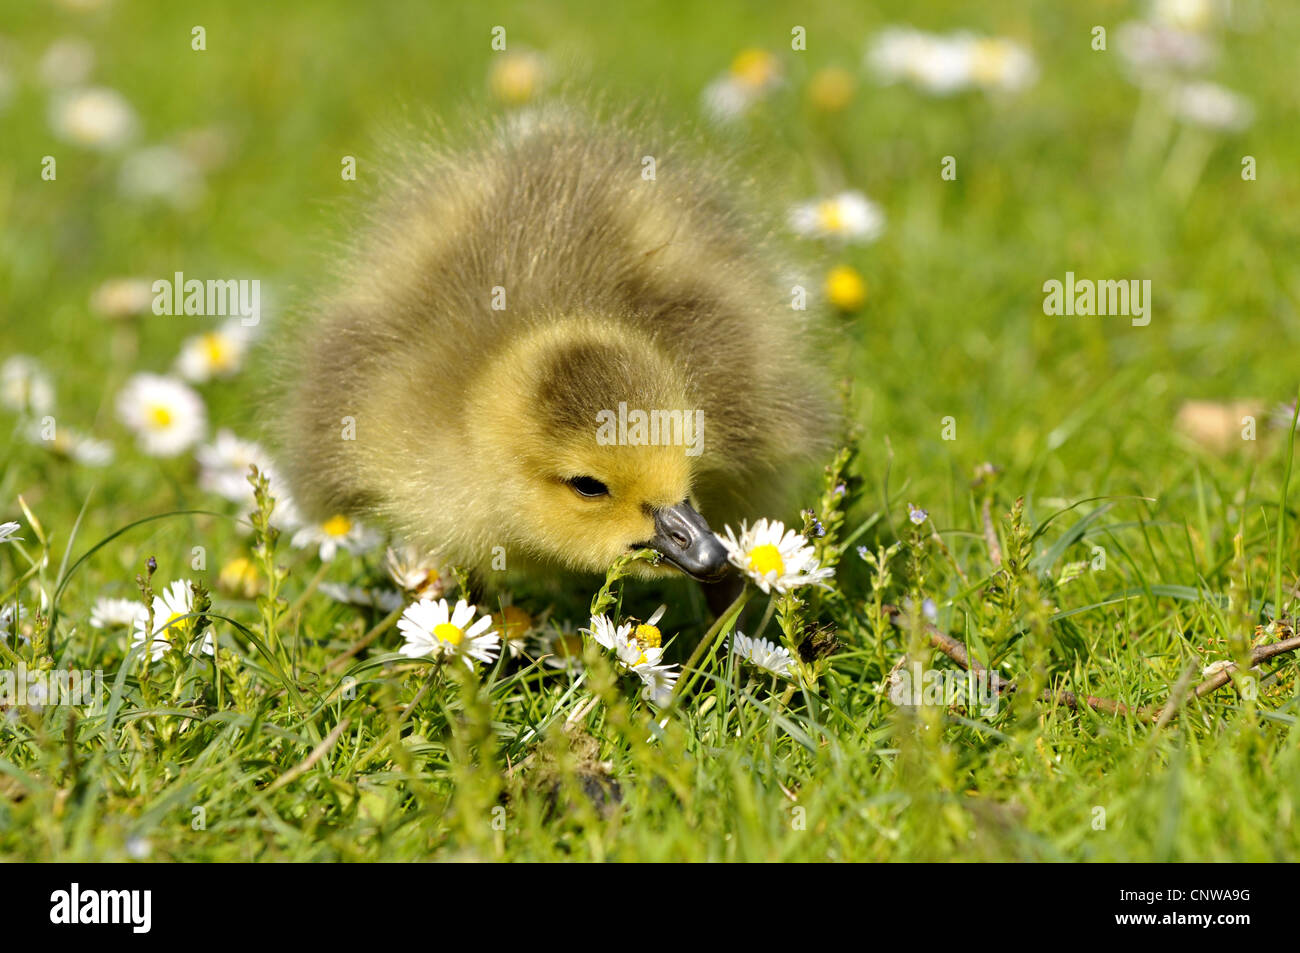 Canada goose (Branta canadensis), chick pecking an English daisy, Germany Stock Photo